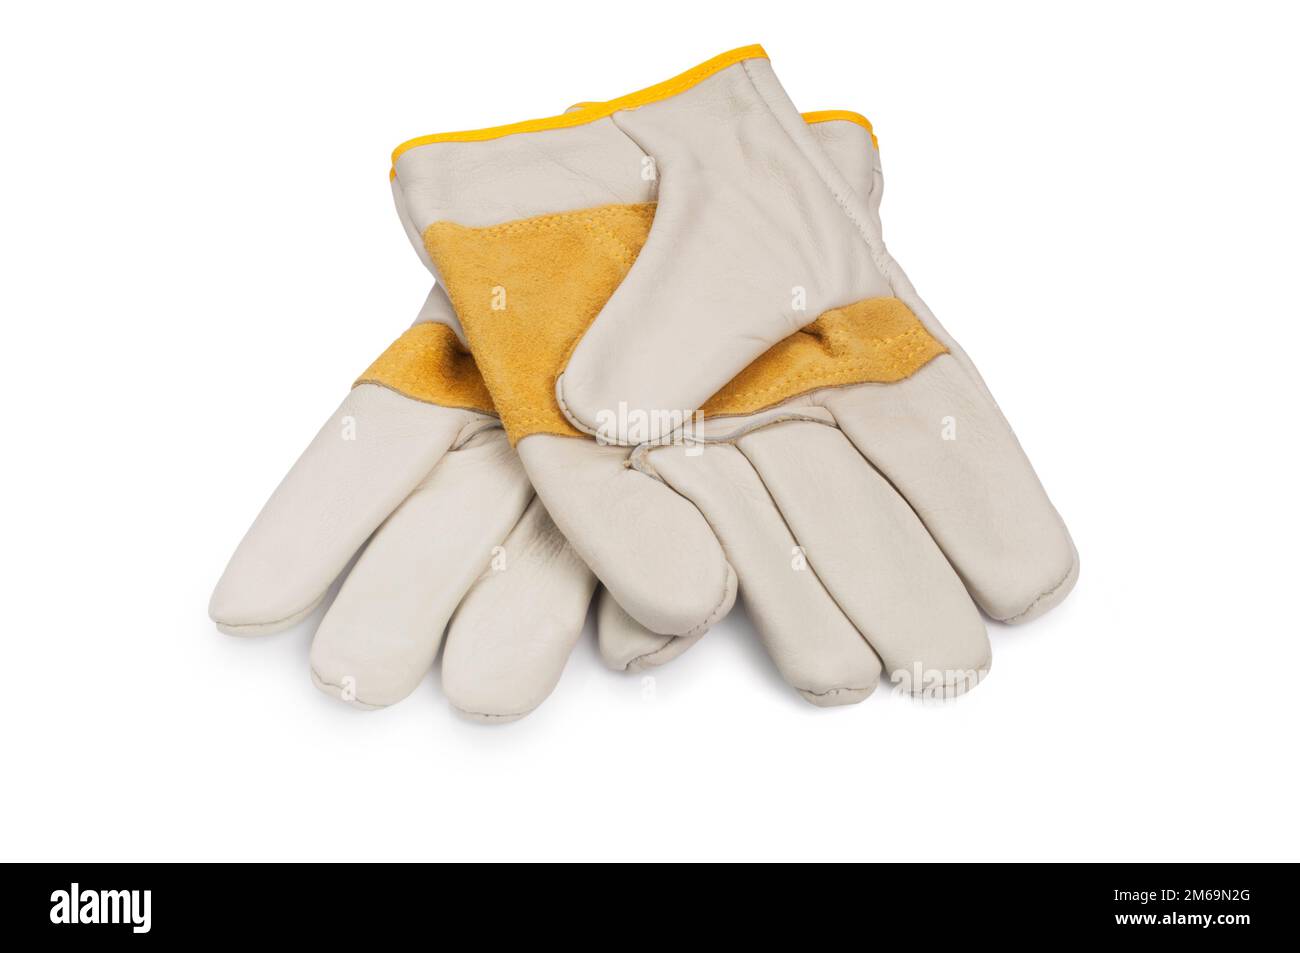 Studio shot of a pair of new leather gardening gloves cut out against a white background - John Gollop Stock Photo